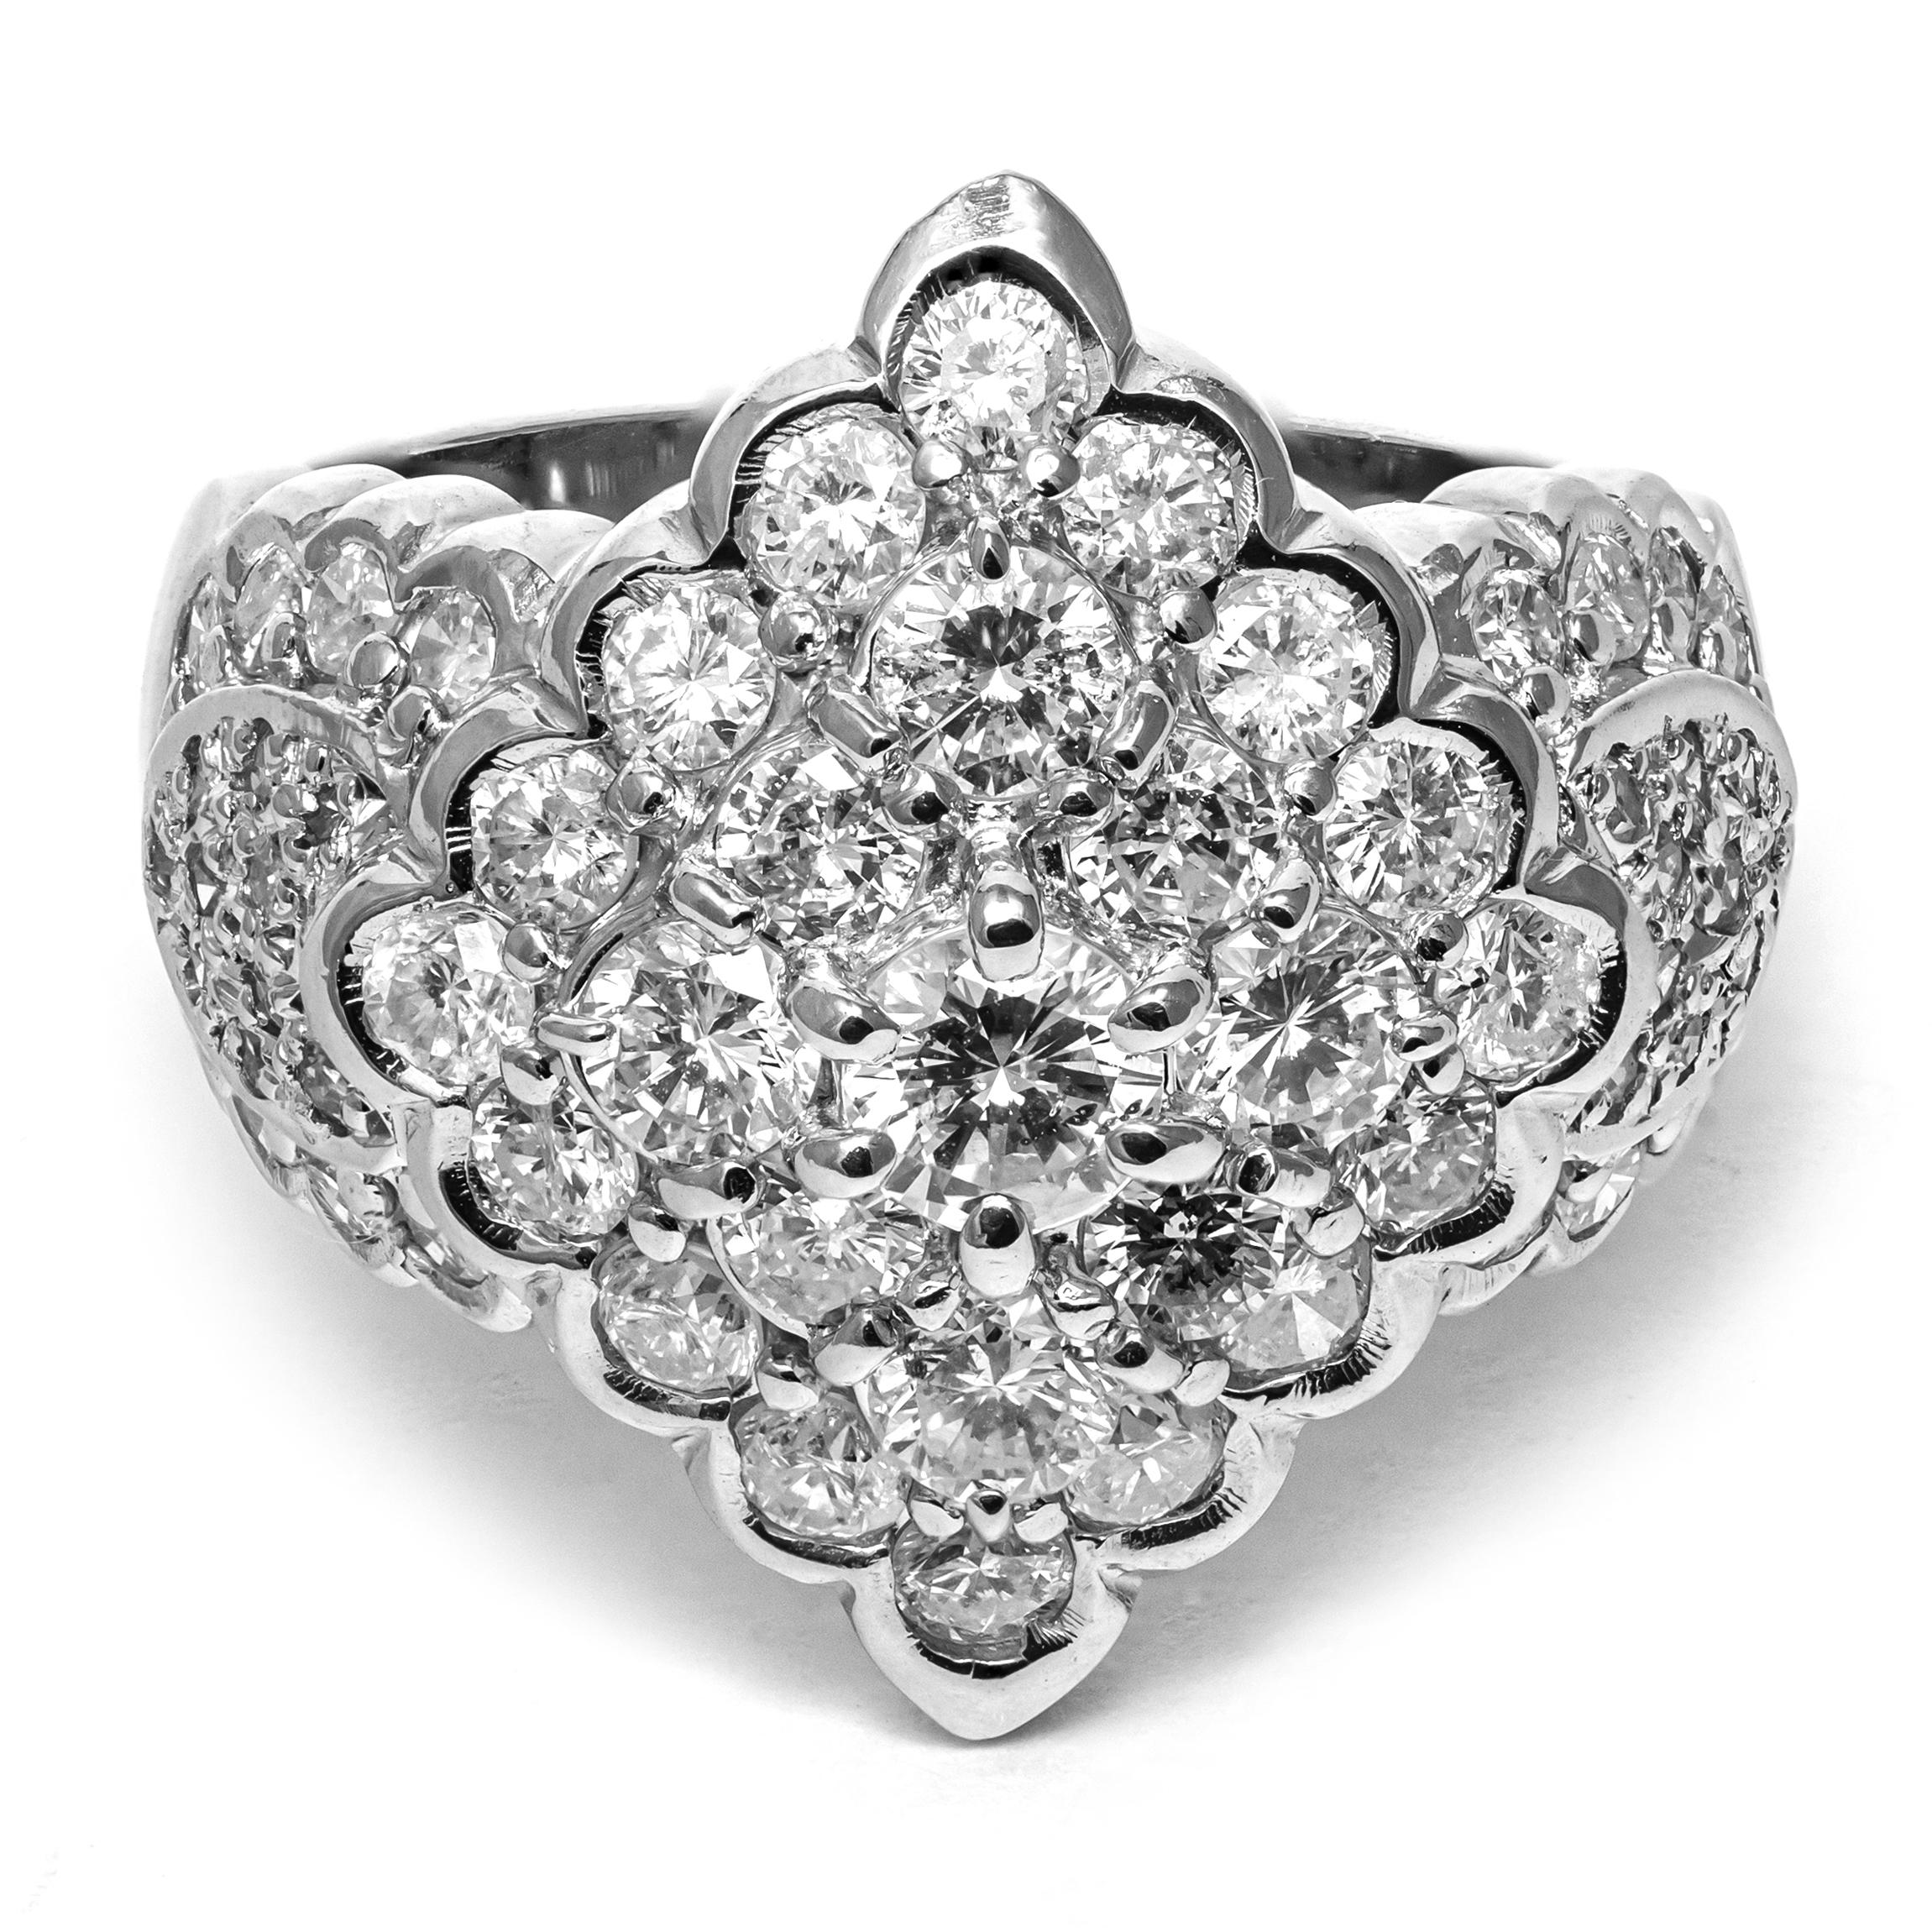 Precious 2.50 ct cluster Ring of Round Brilliant Cut Natural White Diamonds set at the center of a platinum rhombus frame.
